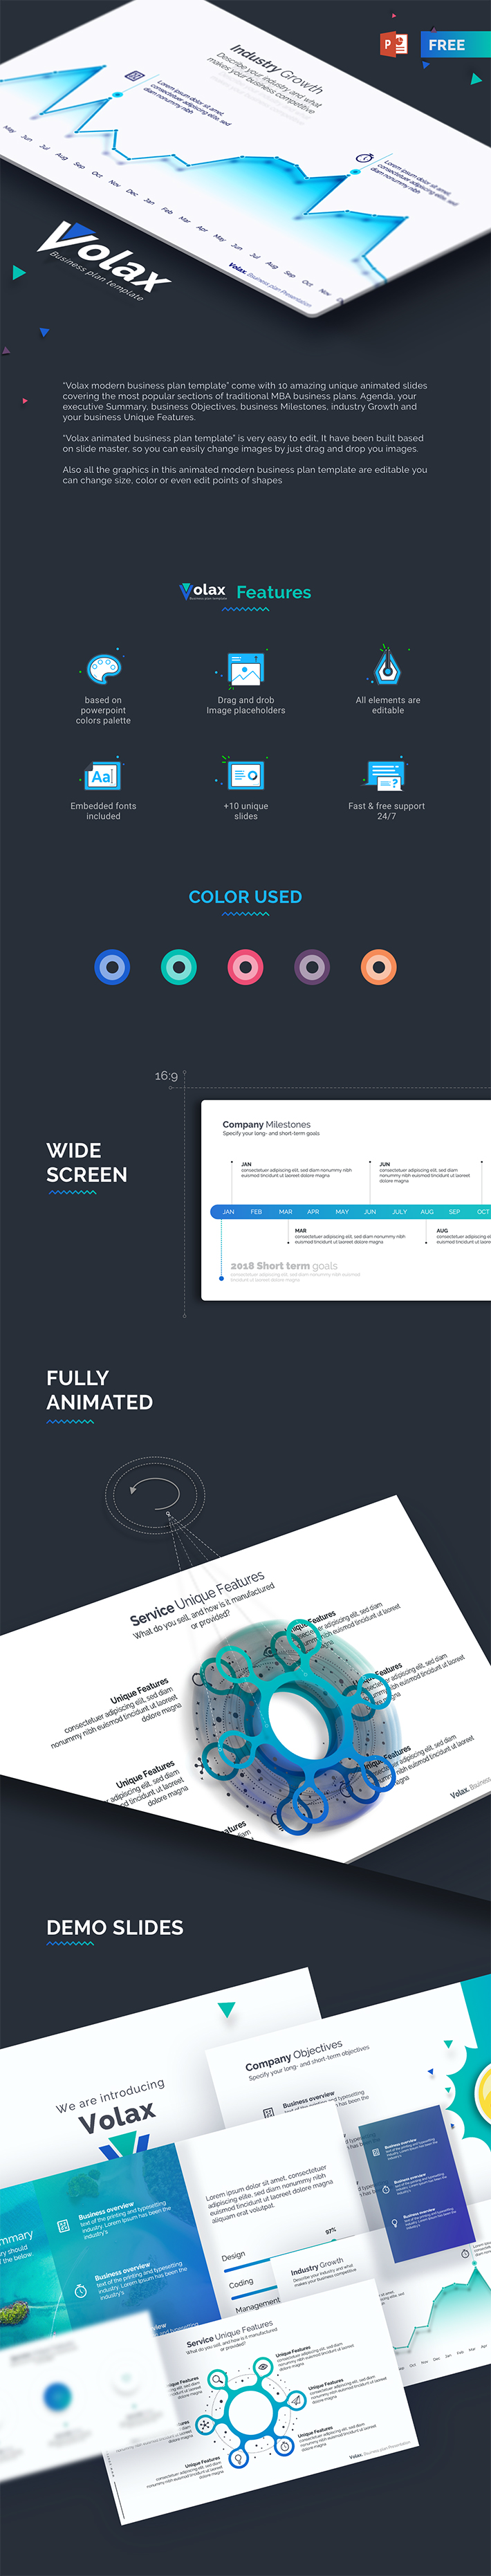 Creative Business Plan Power-Point Template Design Free Download (UI/UX)